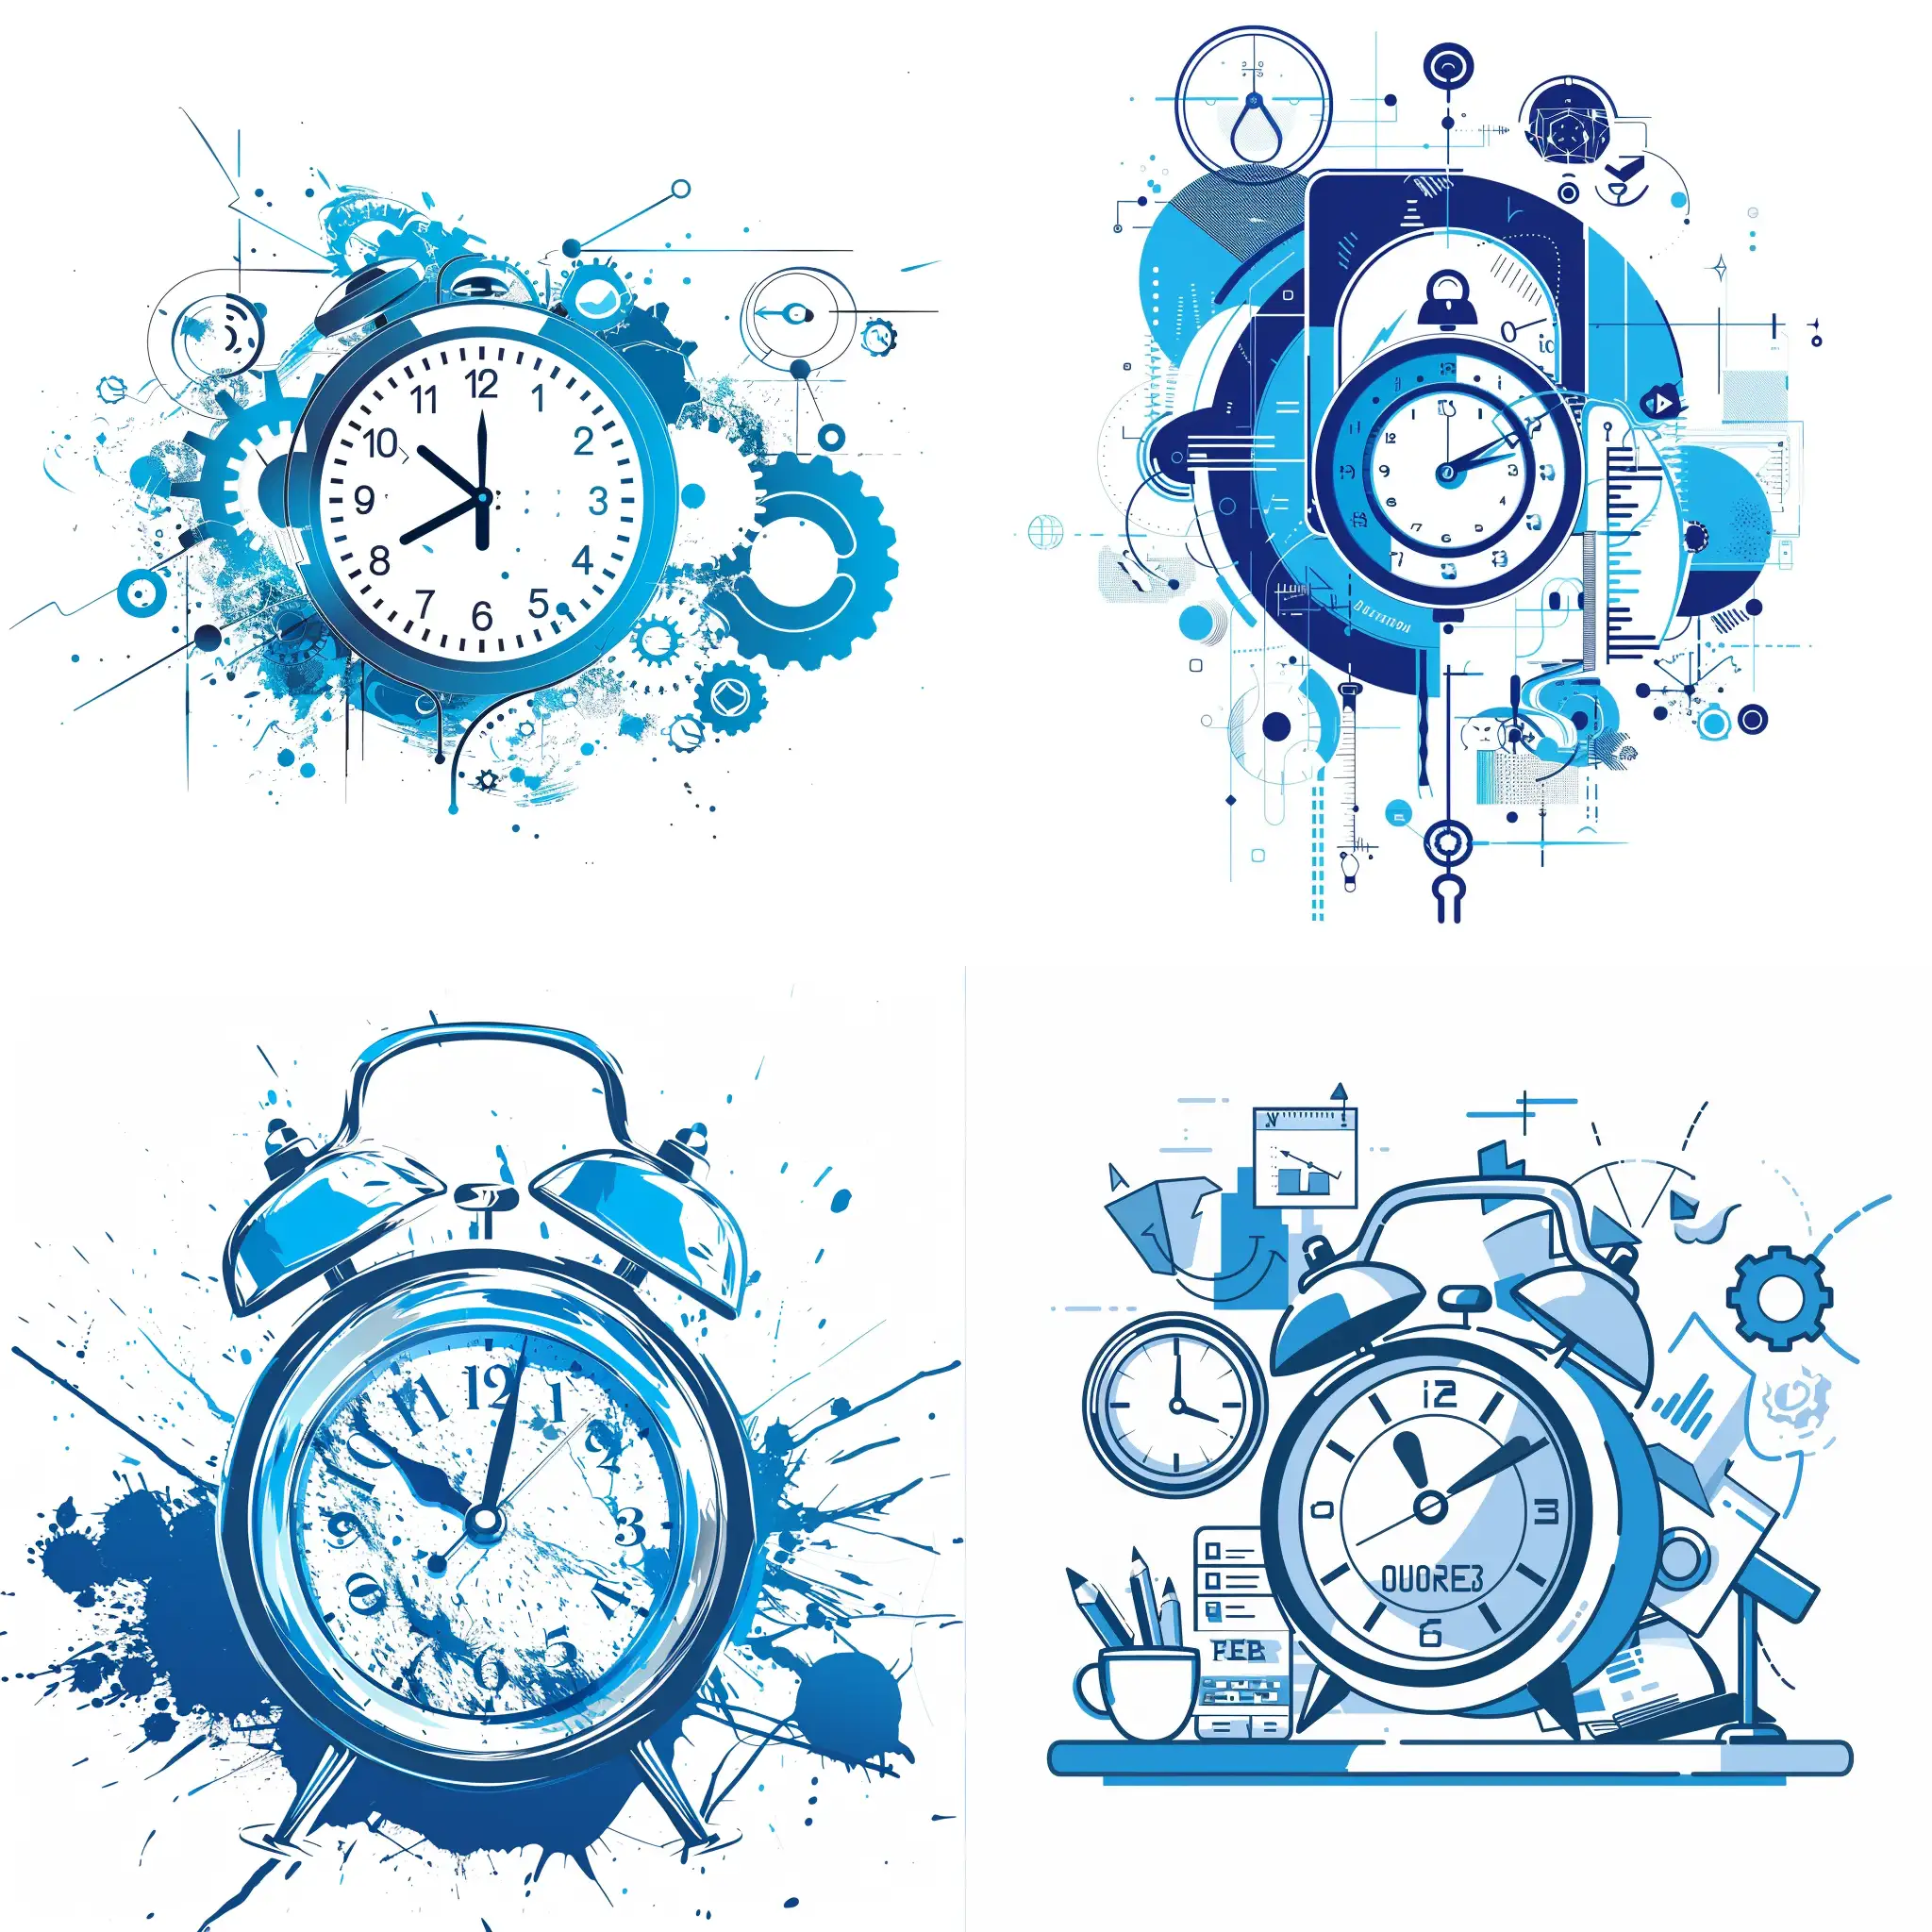 Efficient-Time-Management-in-the-Digital-Age-Blue-and-White-Technology-Illustration